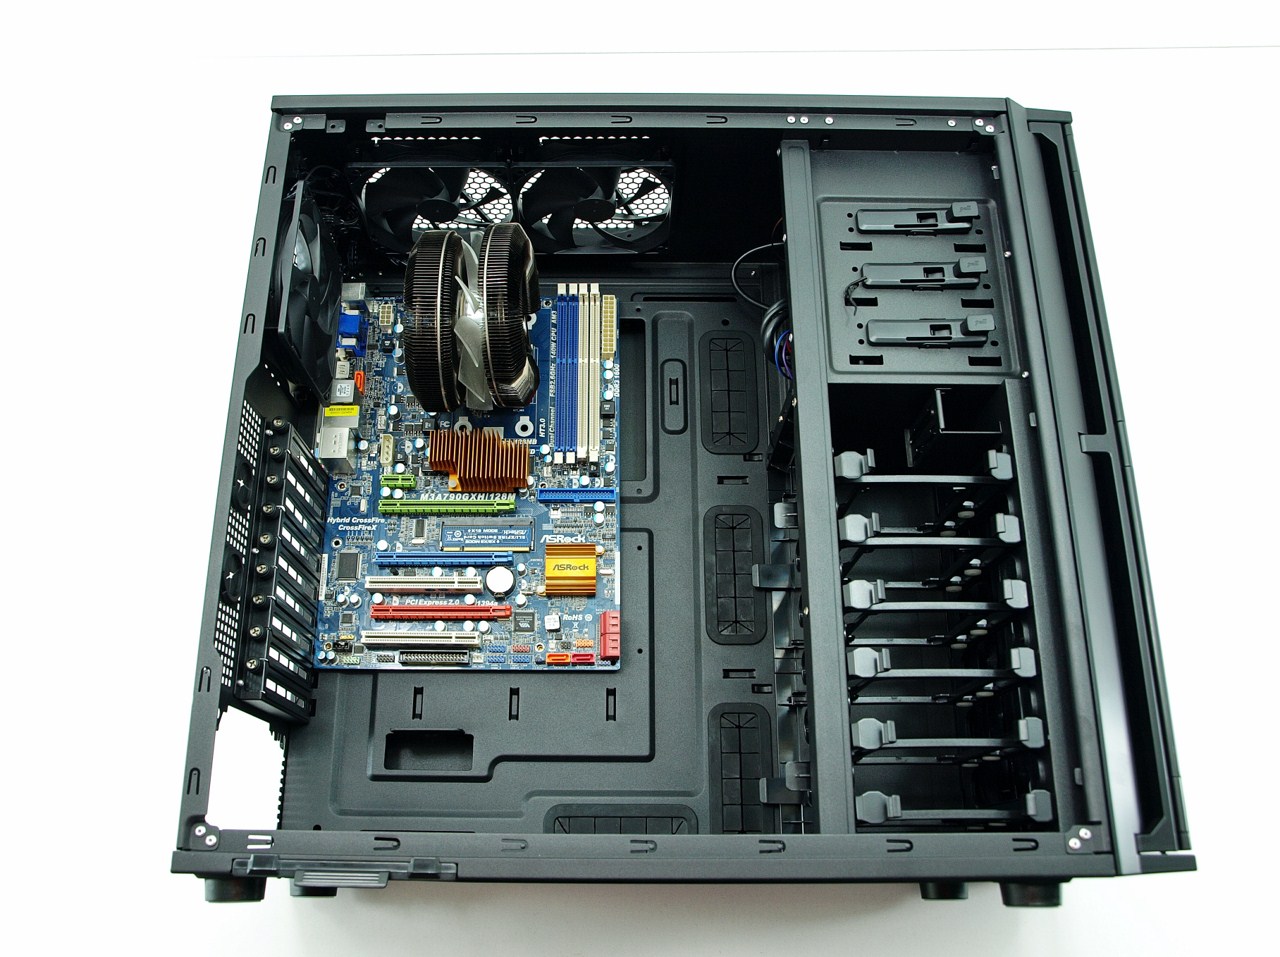 Antec Performance One P280 Super Mid Tower PC Case Review